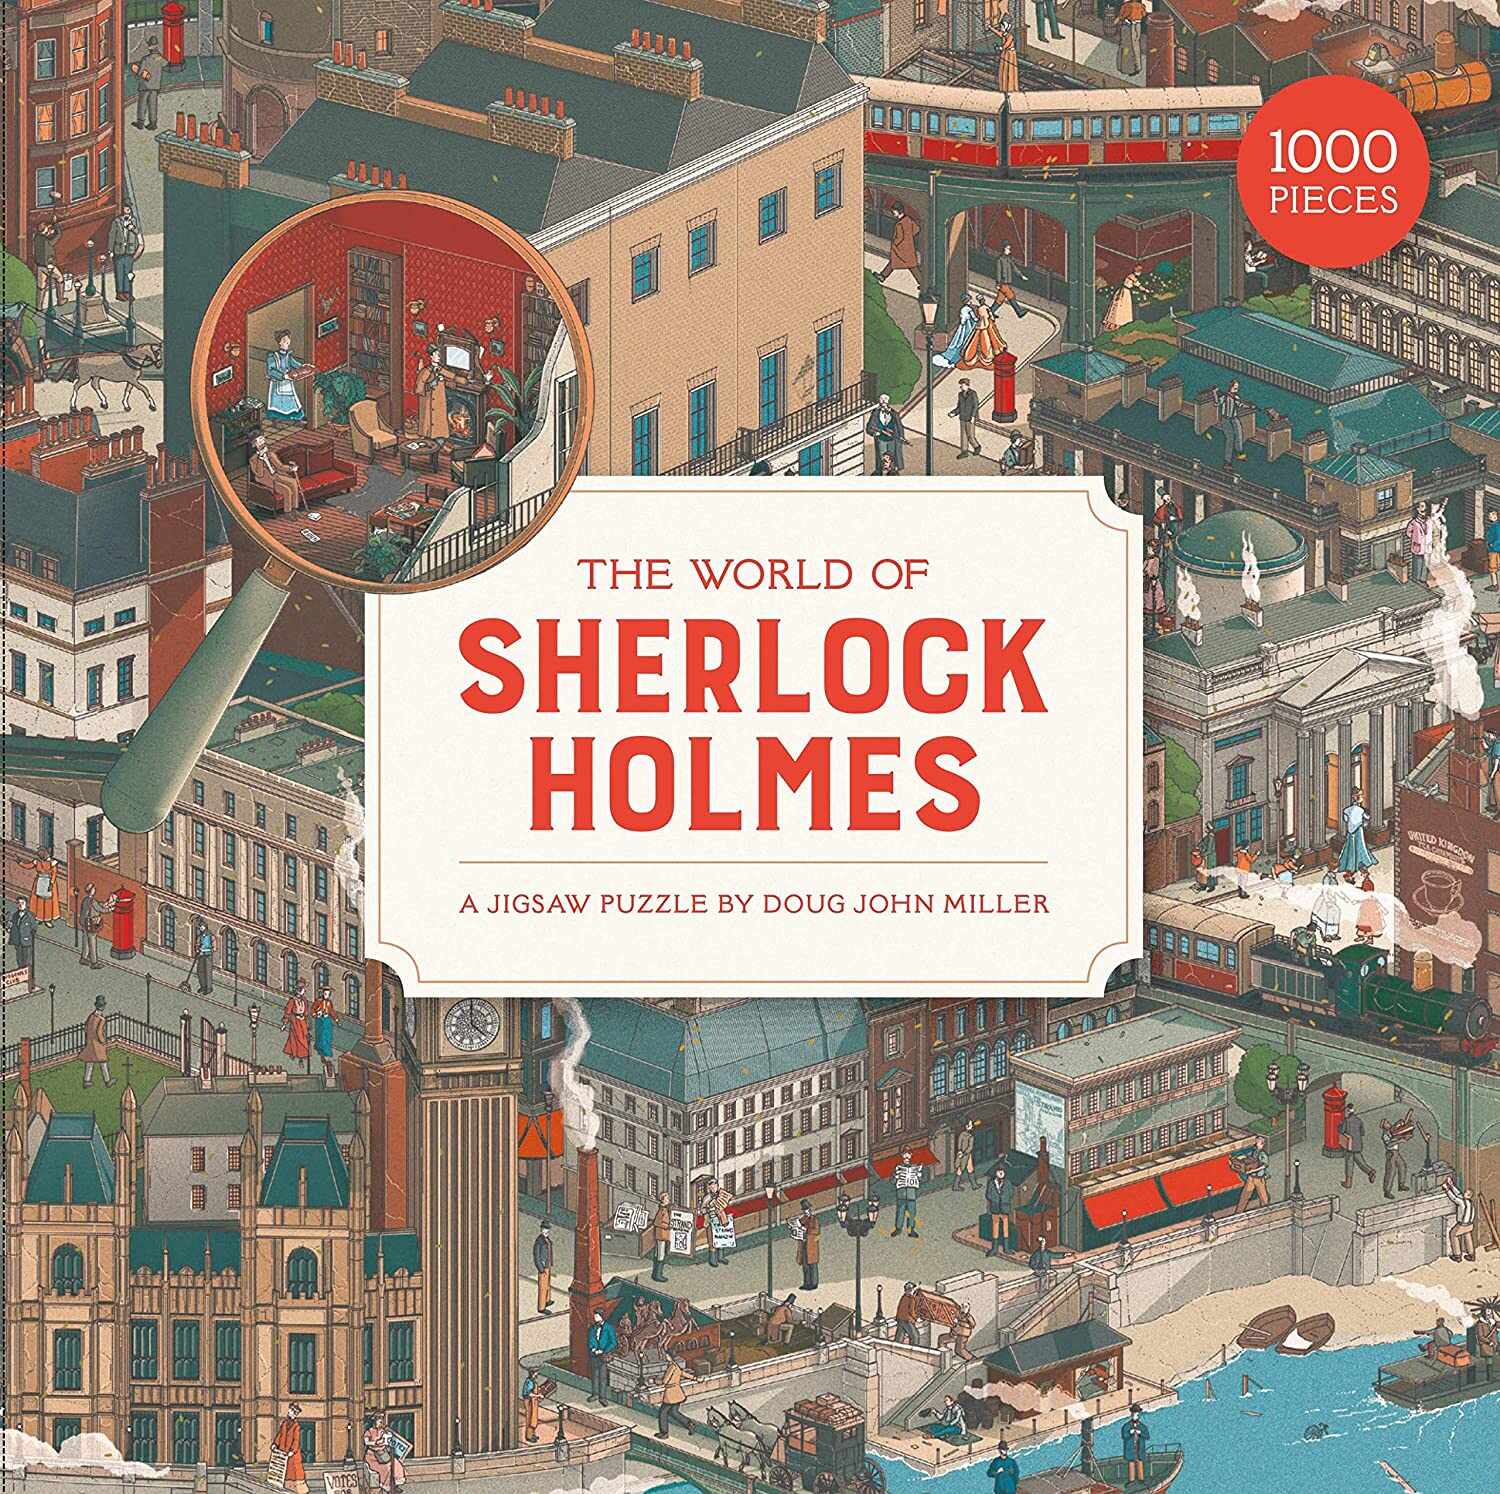 The World of Sherlock Holmes: A 1000 Piece Jigsaw Puzzle | Laurence King Publishing